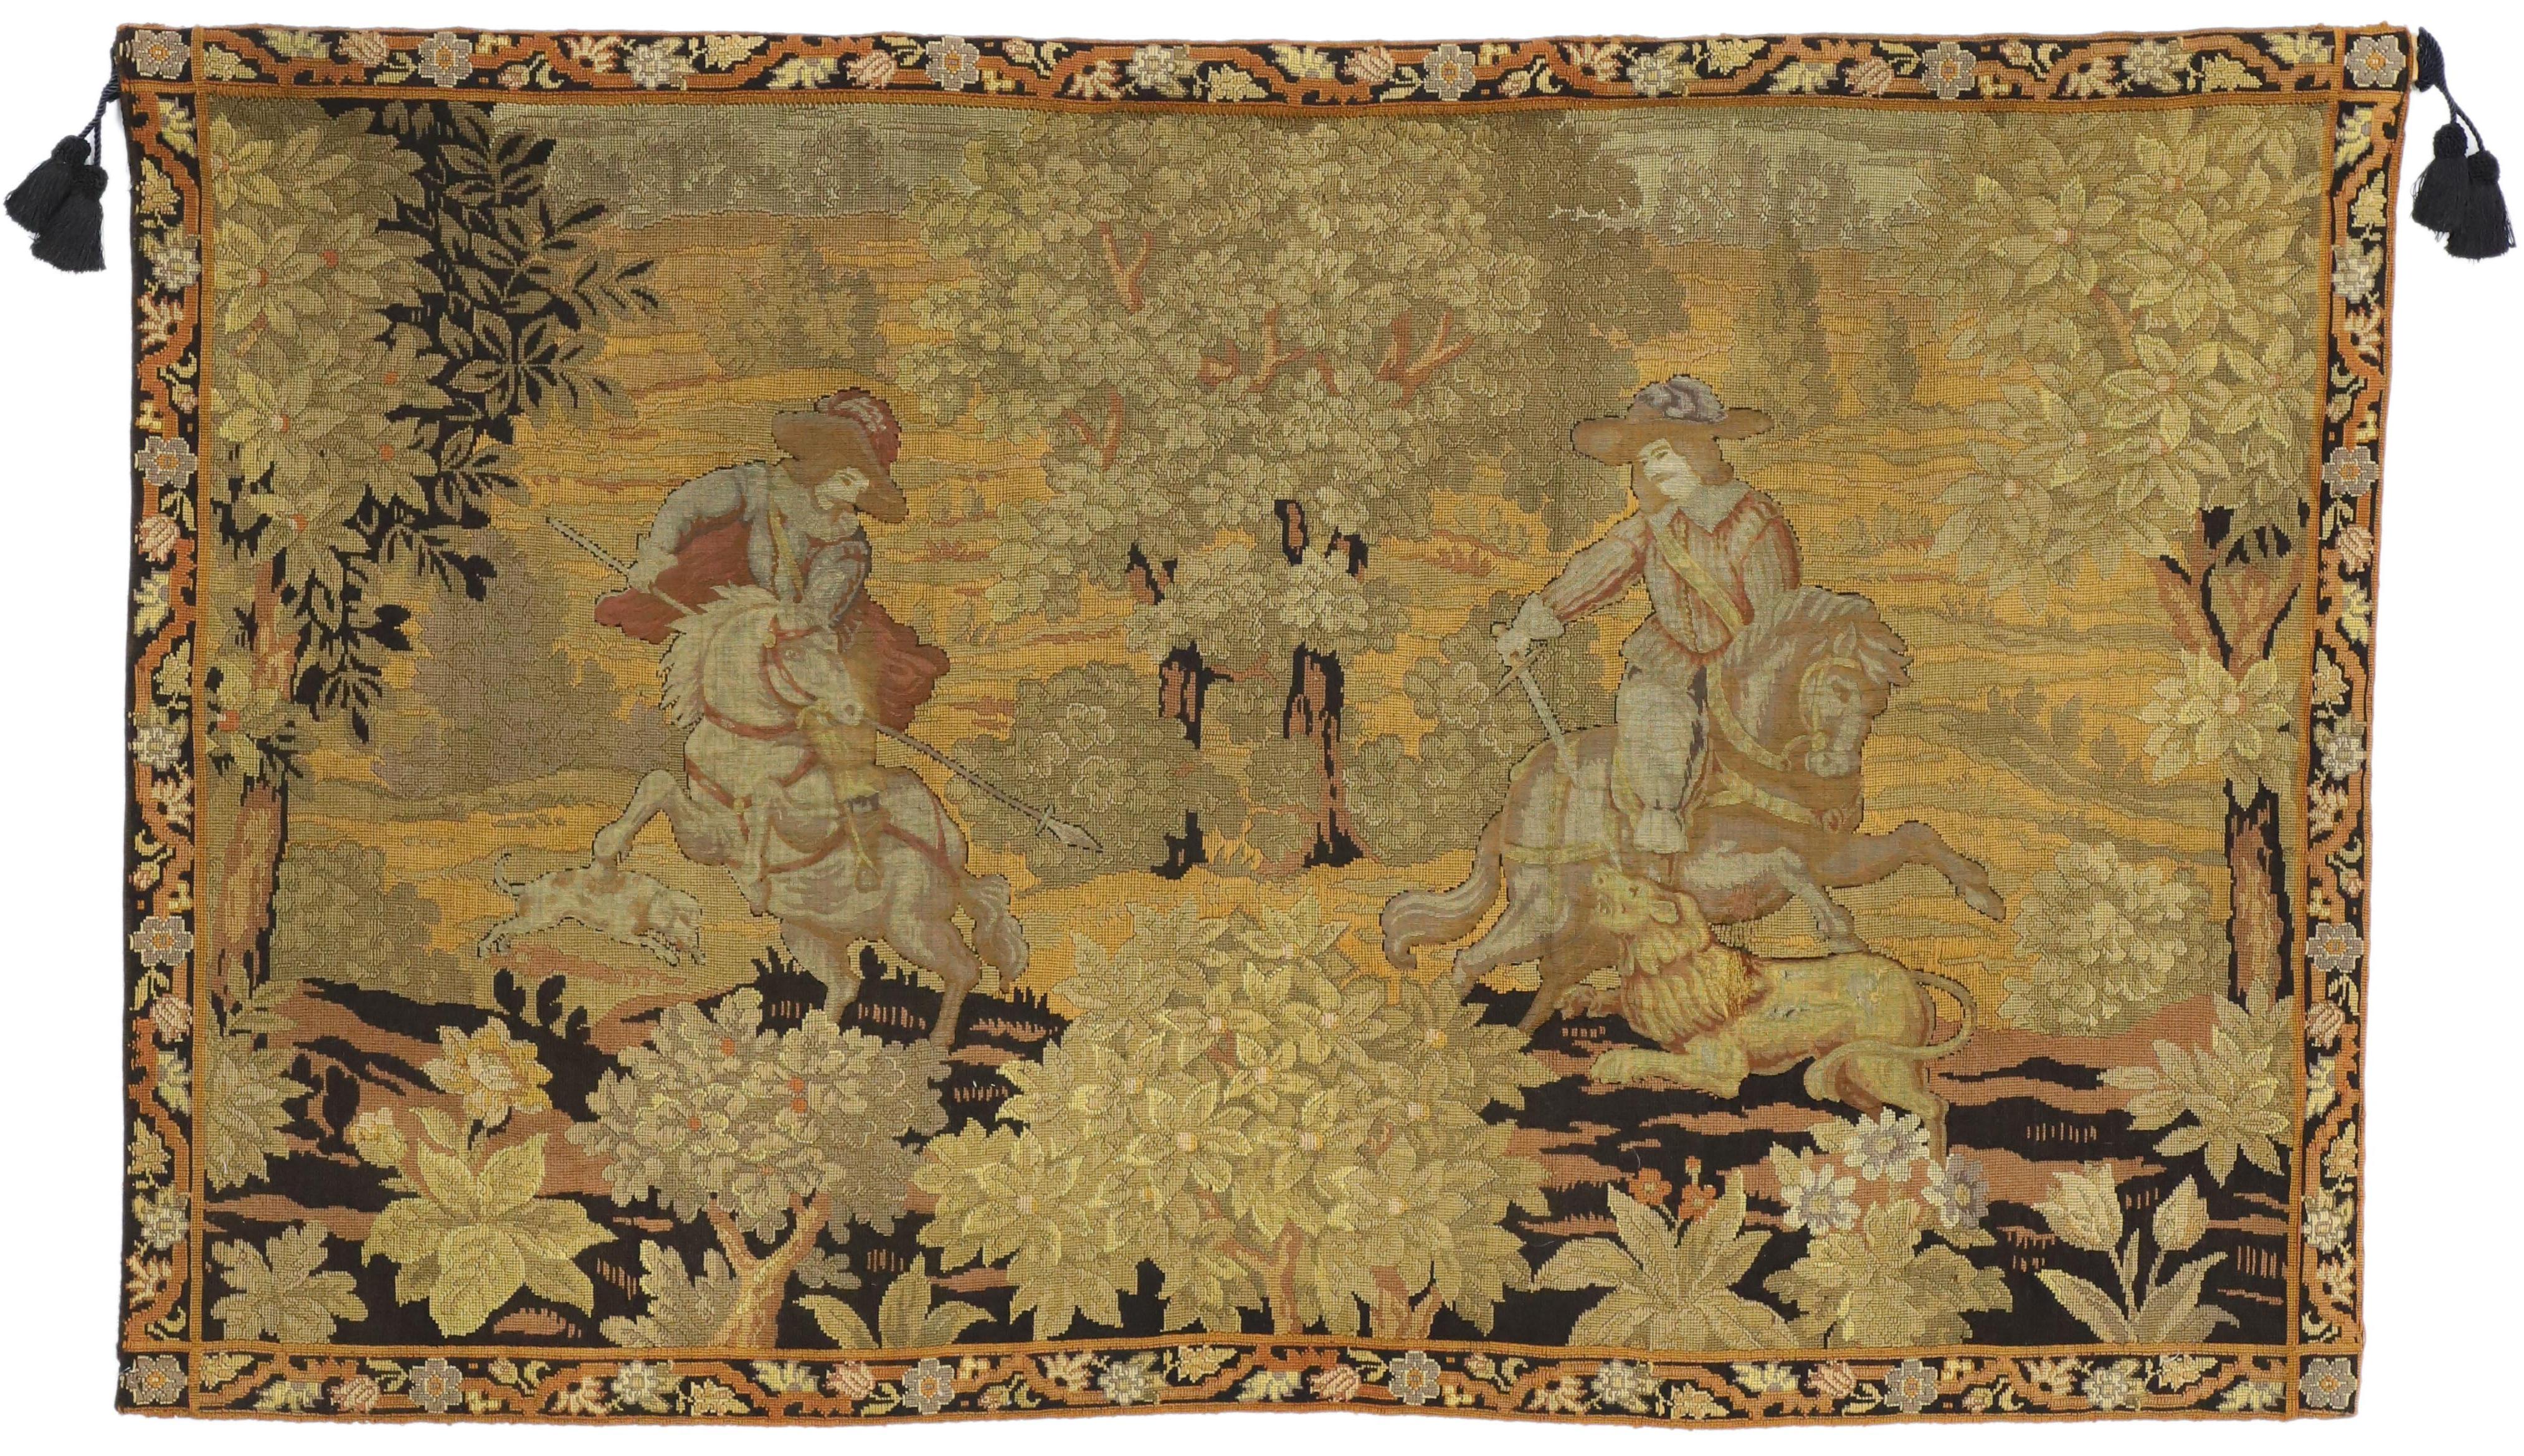 19th Century Antique English Tapestry with Medieval Hunting Scene, Wall Hanging